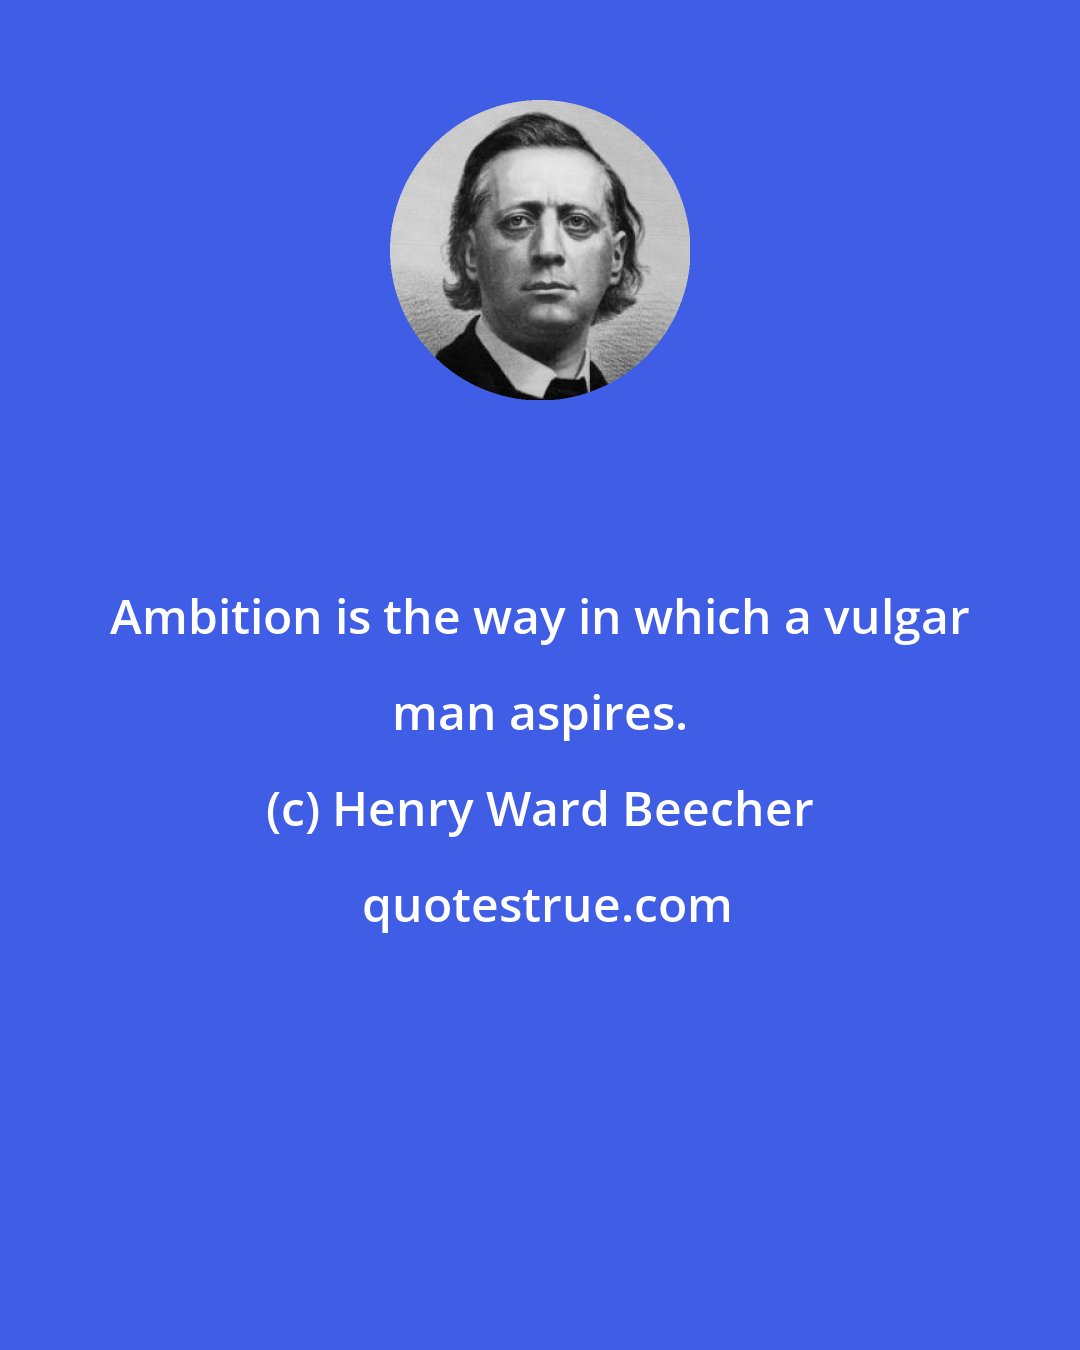 Henry Ward Beecher: Ambition is the way in which a vulgar man aspires.